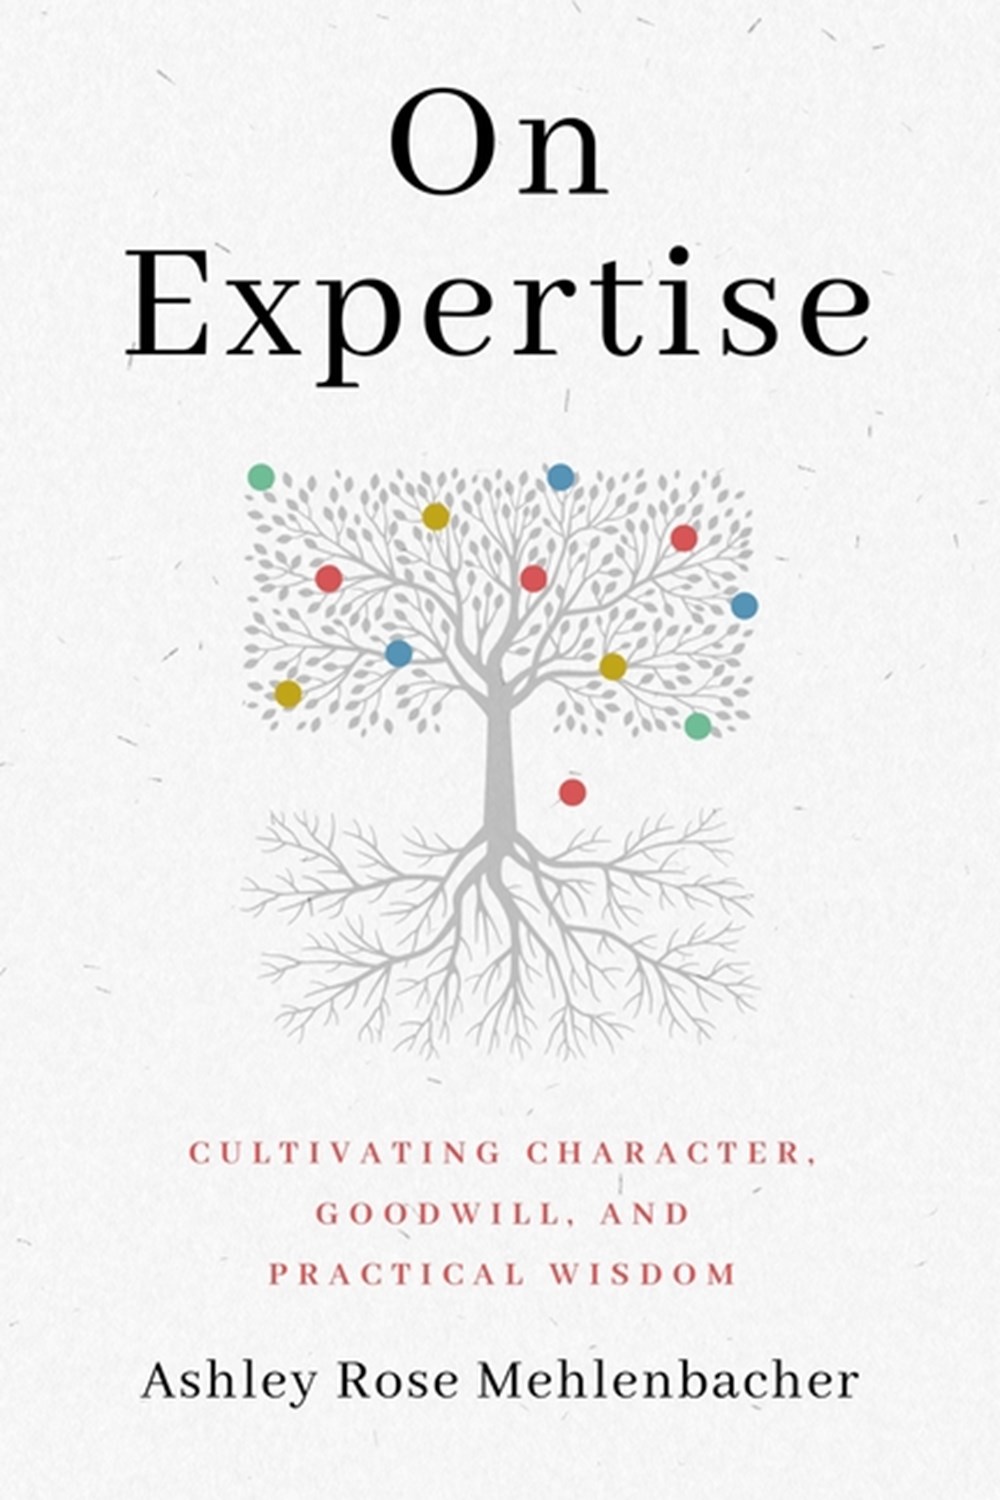 On Expertise: Cultivating Character, Goodwill, and Practical Wisdom